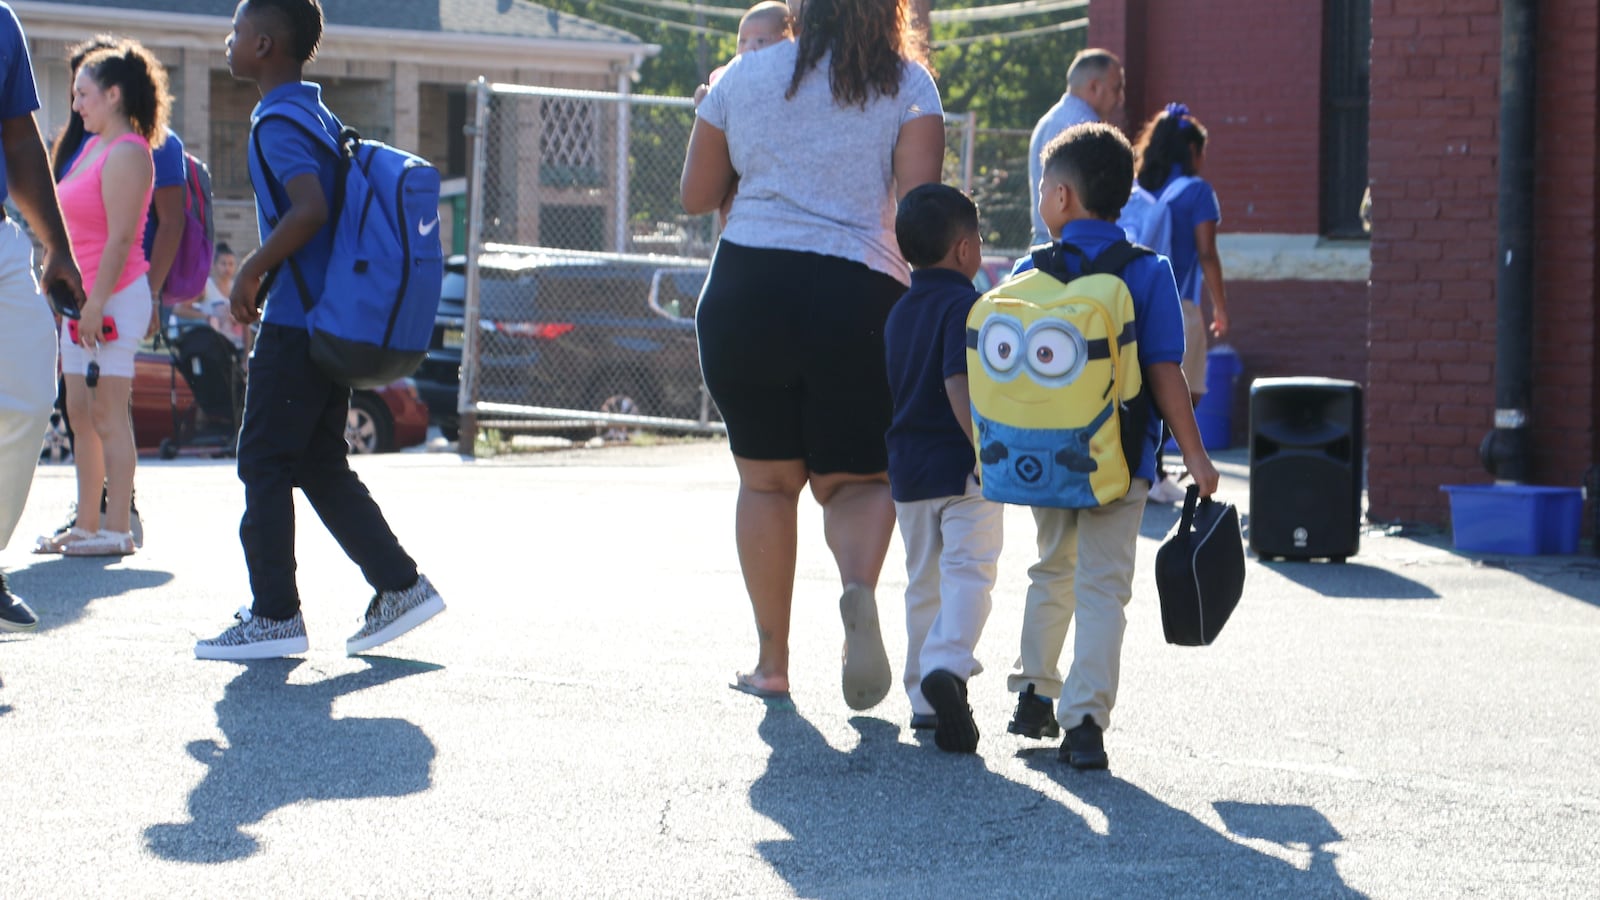 Under new rules, Newark families will no longer be able to enroll online at schools after the application period ends. Instead, they will have to submit applications in person.